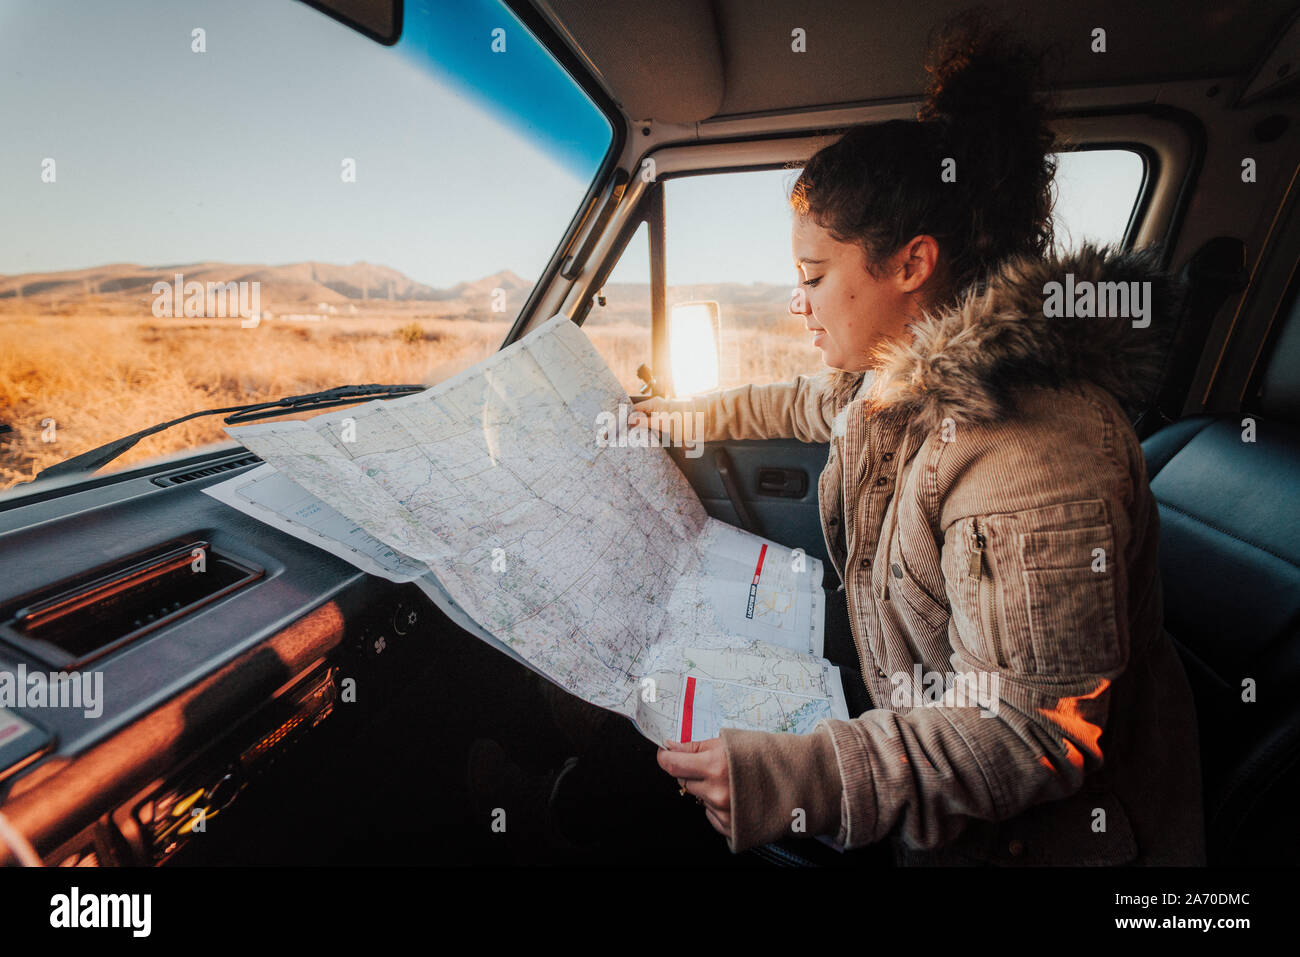 Young woman looking at a map during a Californian road trip Stock Photo